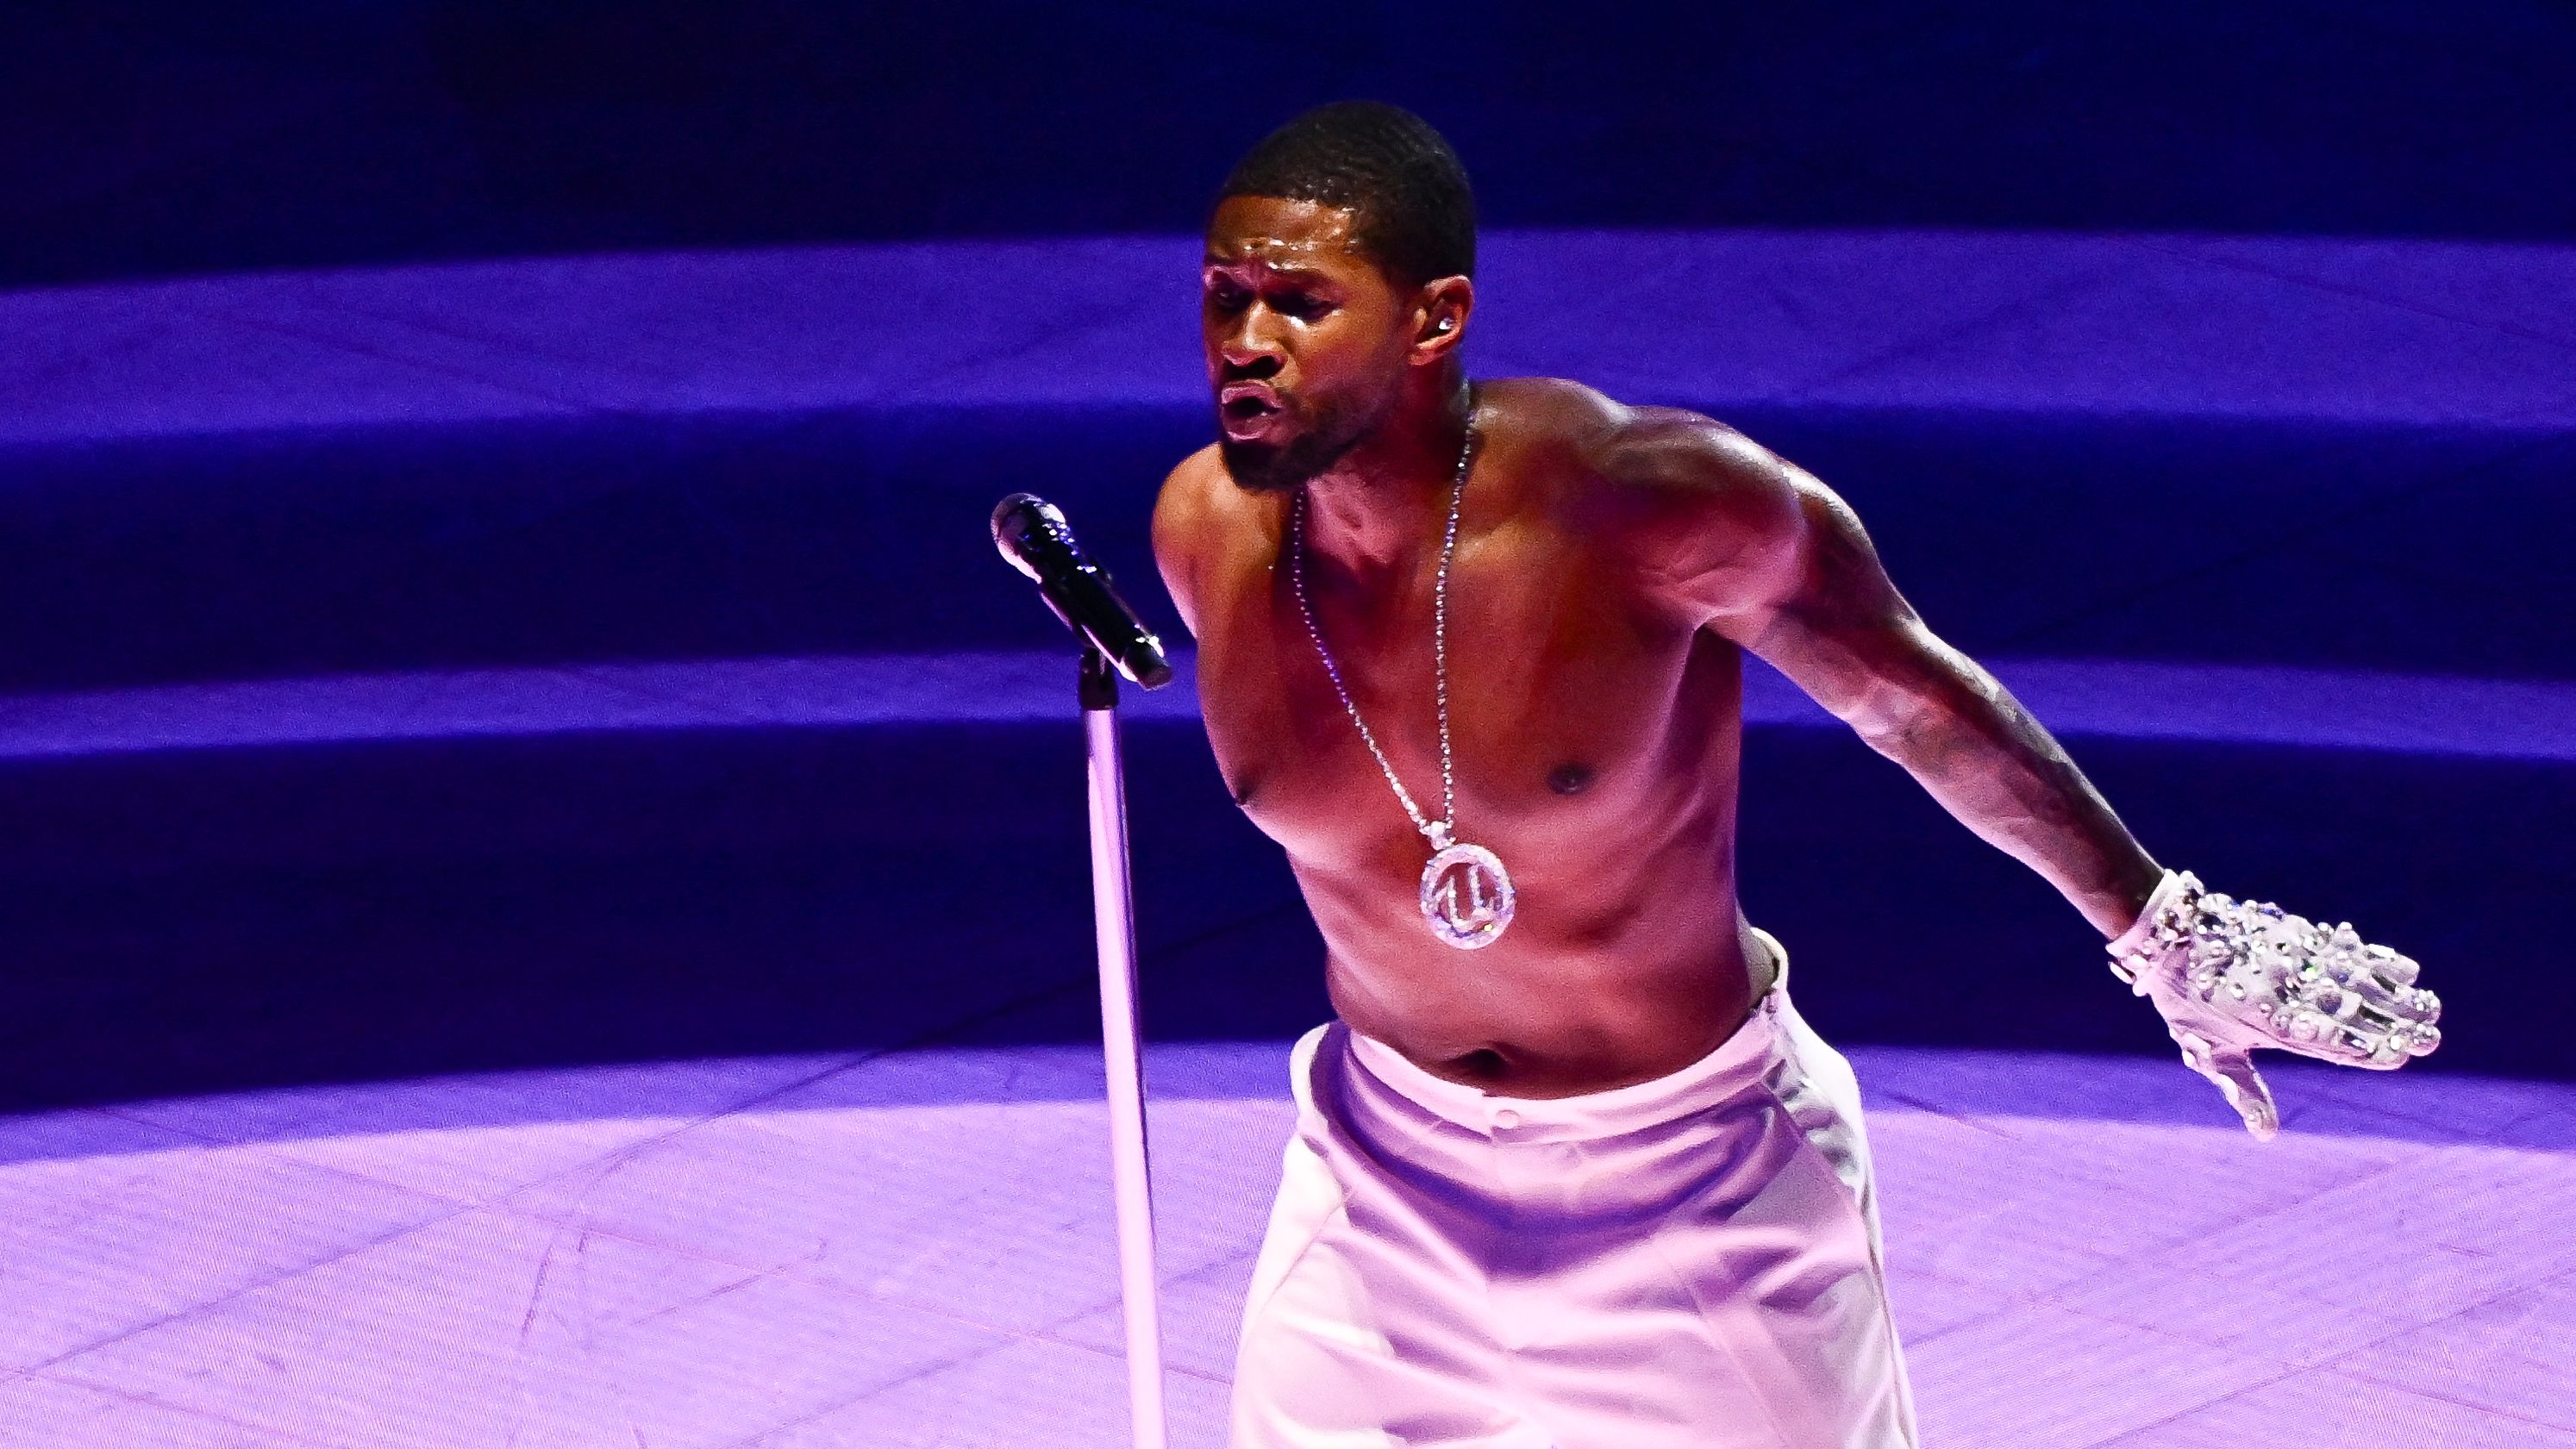 Usher, 45, Showed Off His Ripped Physique at the Super Bowl